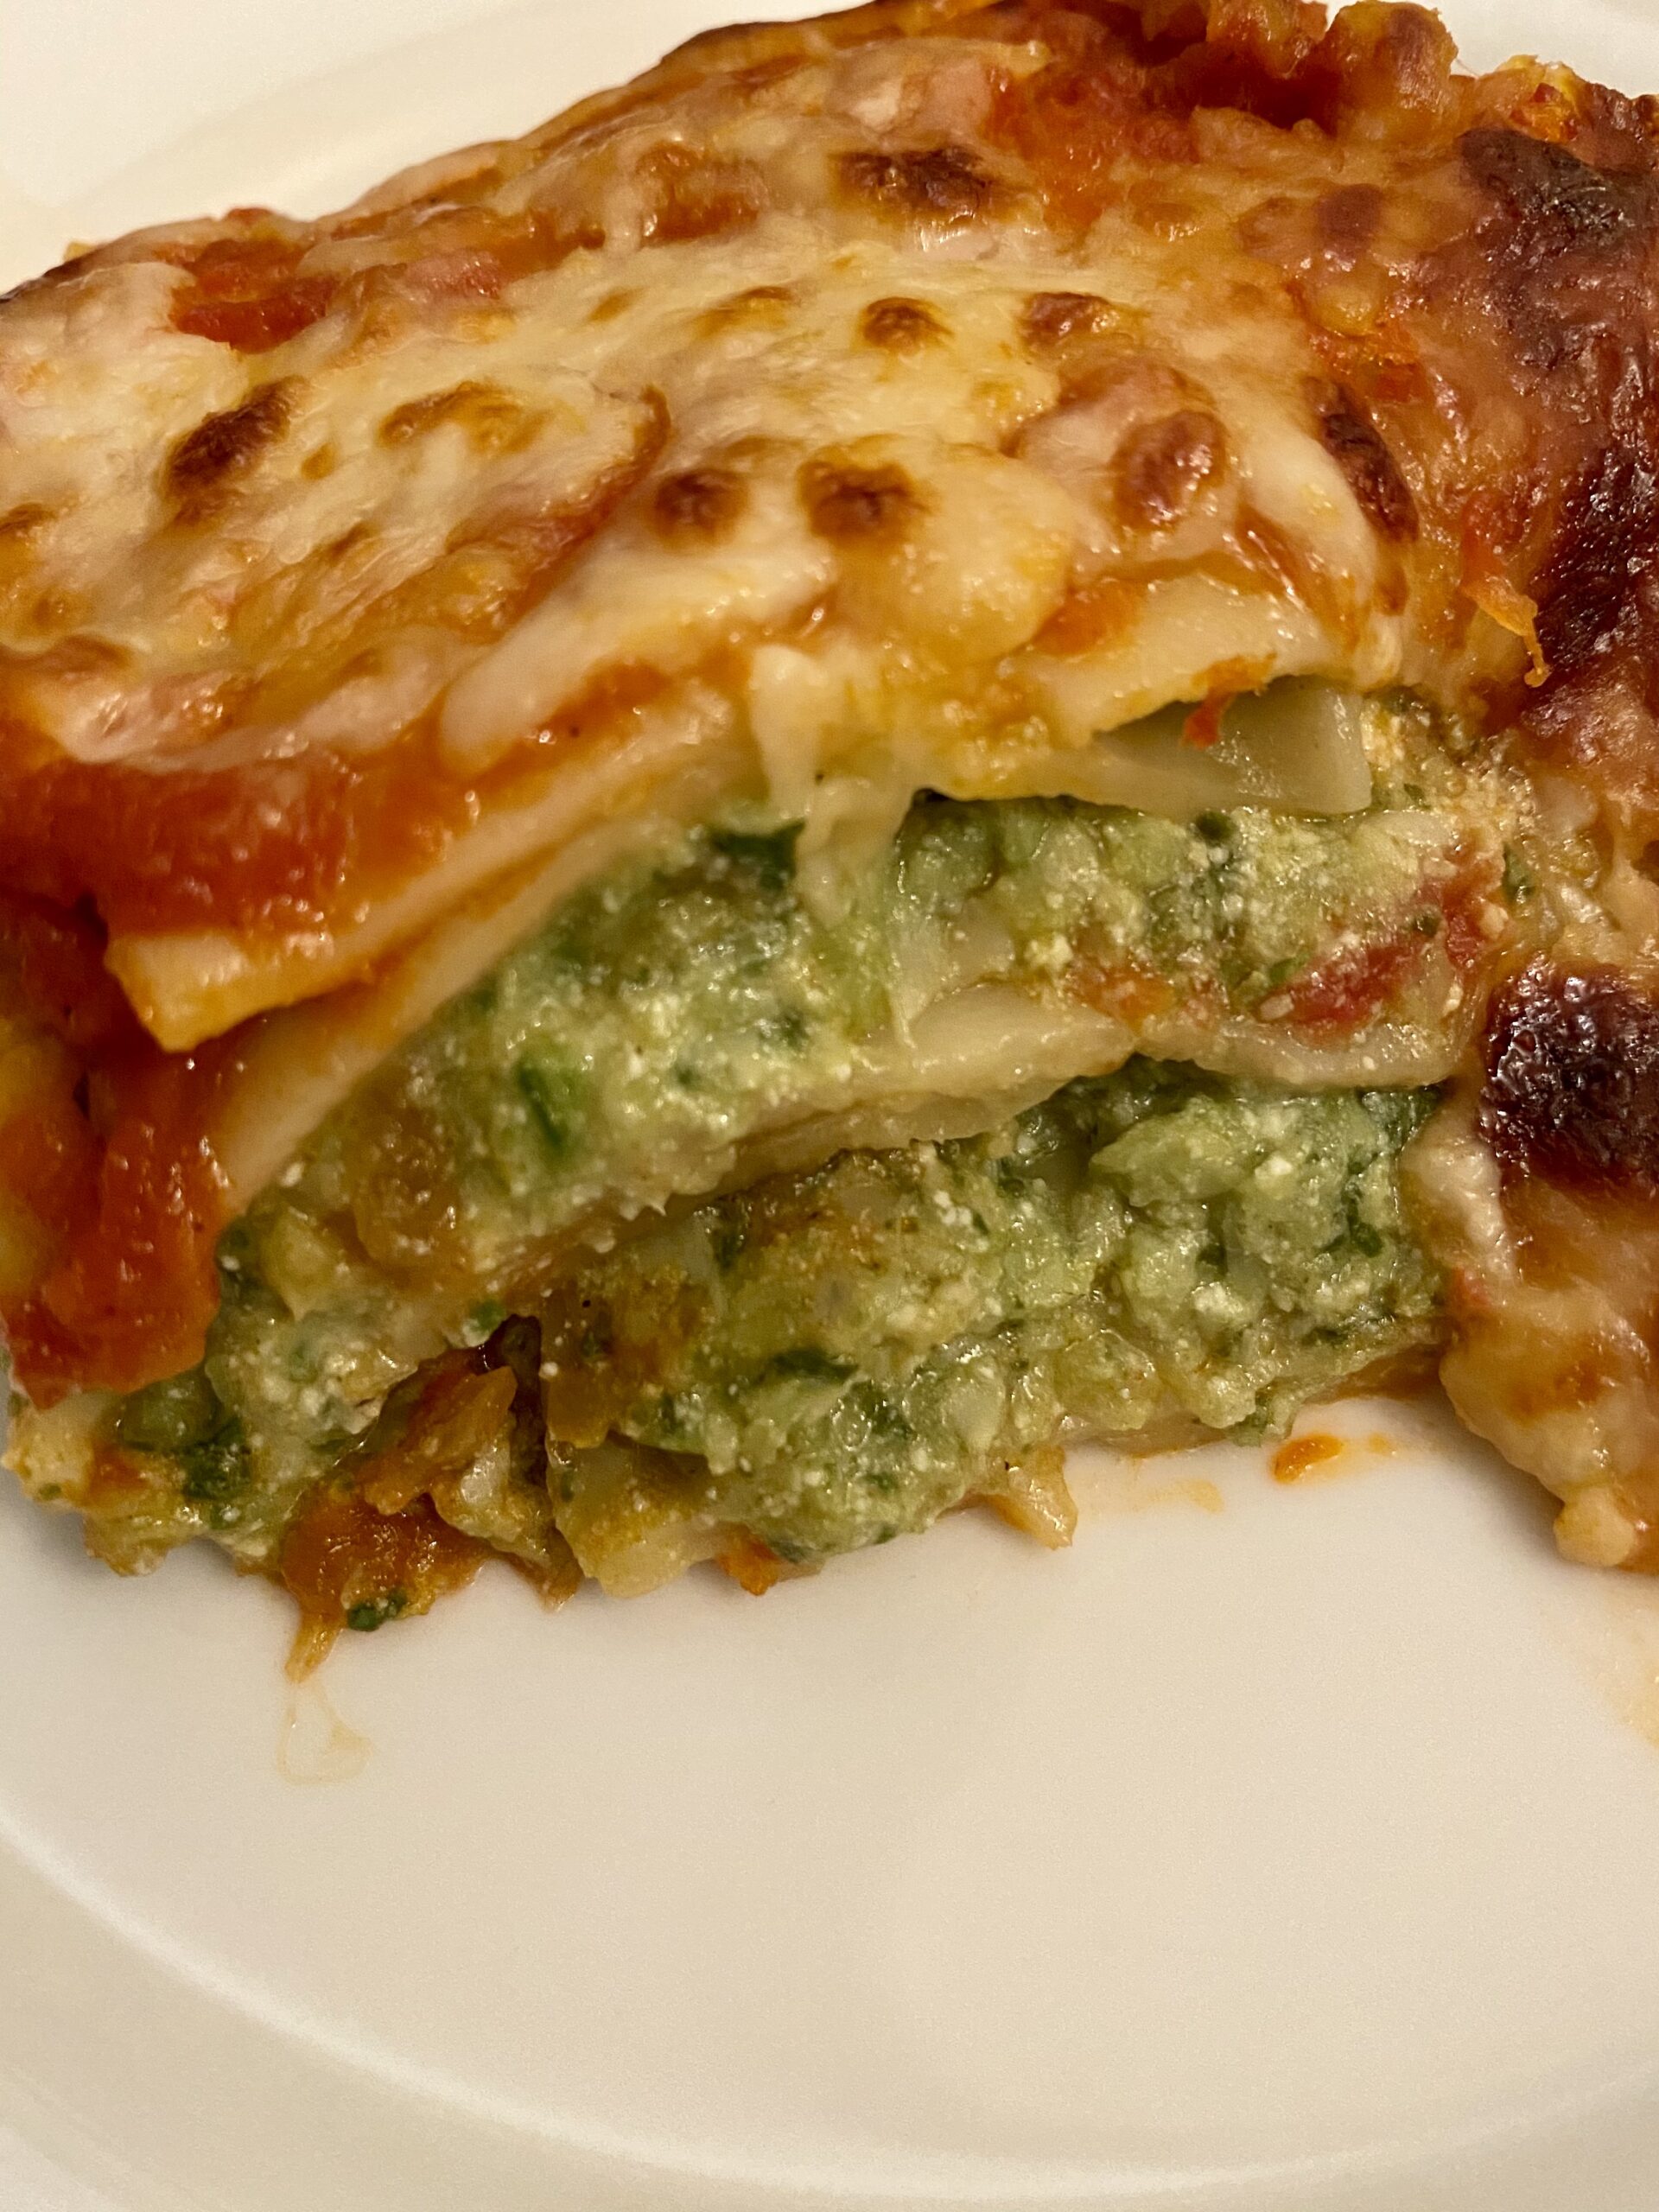 Artichoke and Spinach Lasagna ready to be enjoyed